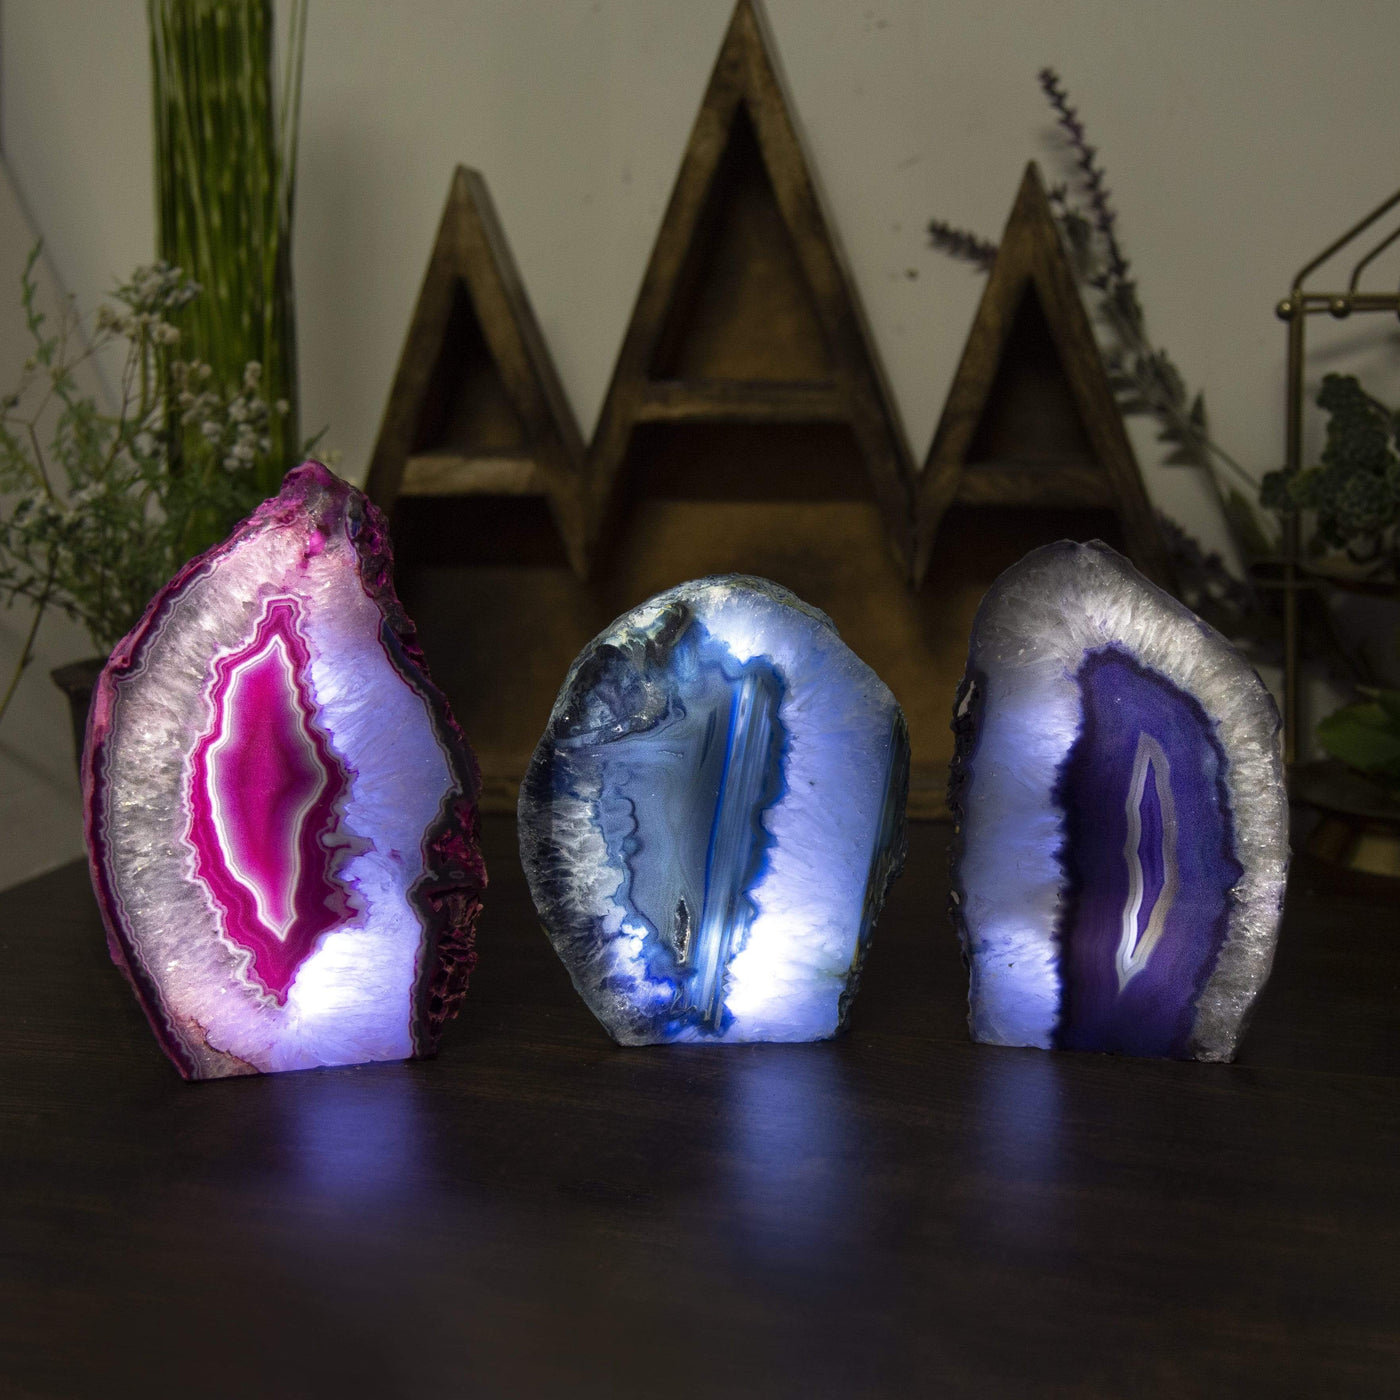 Three agate lamps on a table lit with a dark surrounding within an alter.